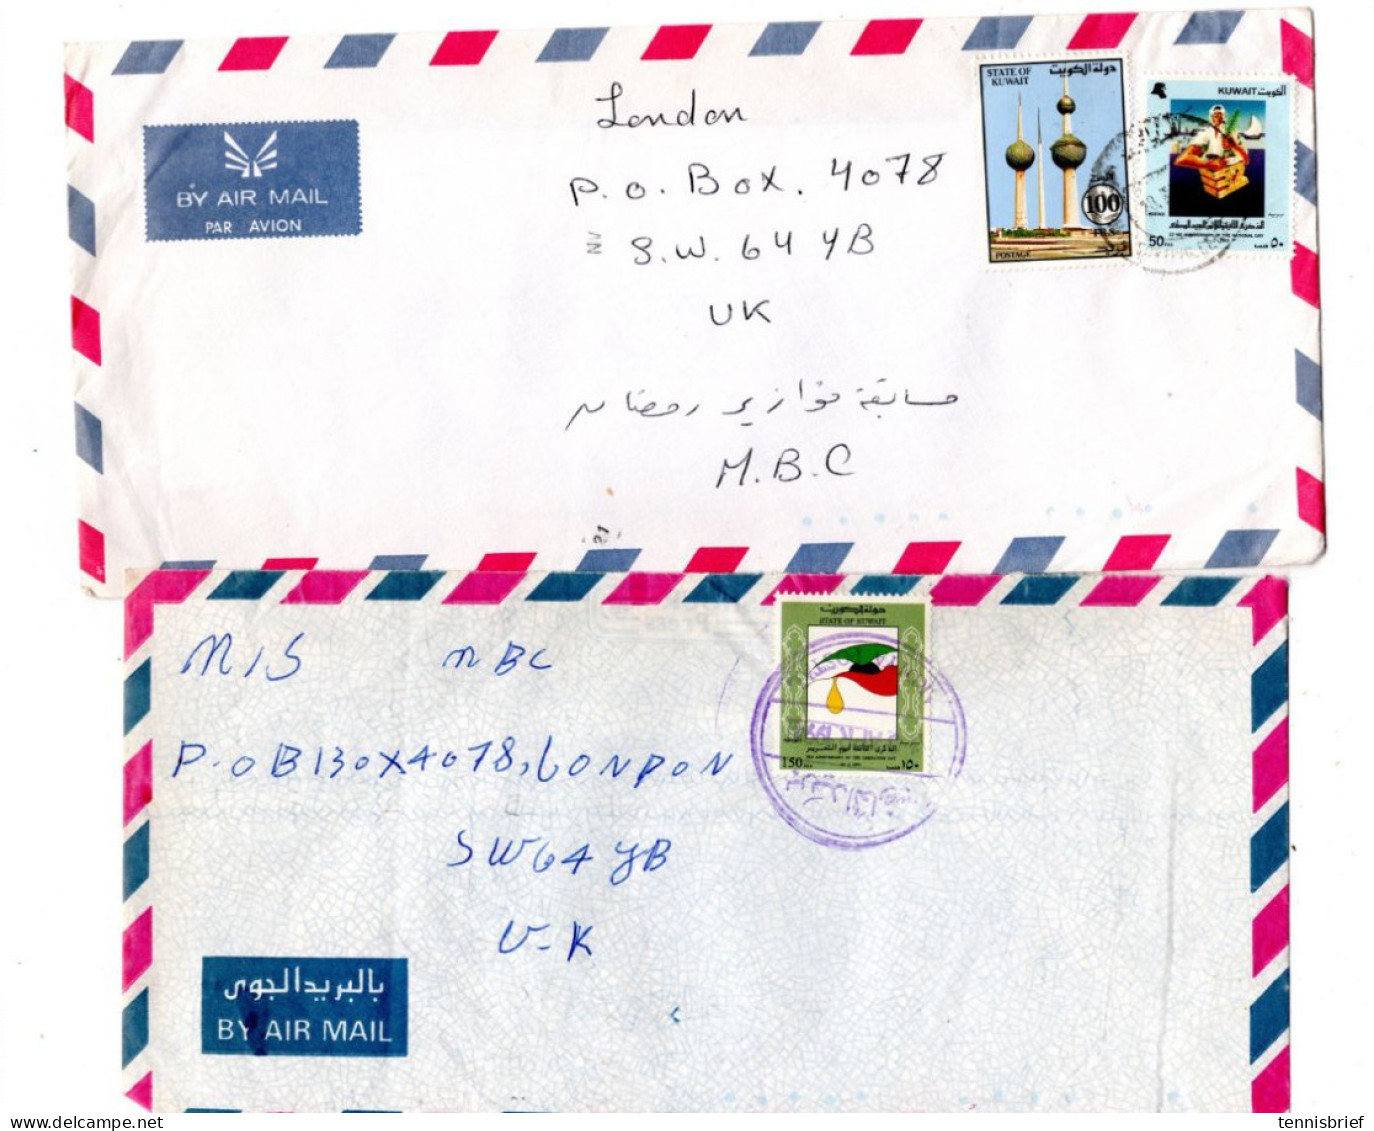 ca.1990 , 6 airmail covers , different frankings,, all going to England  #1541